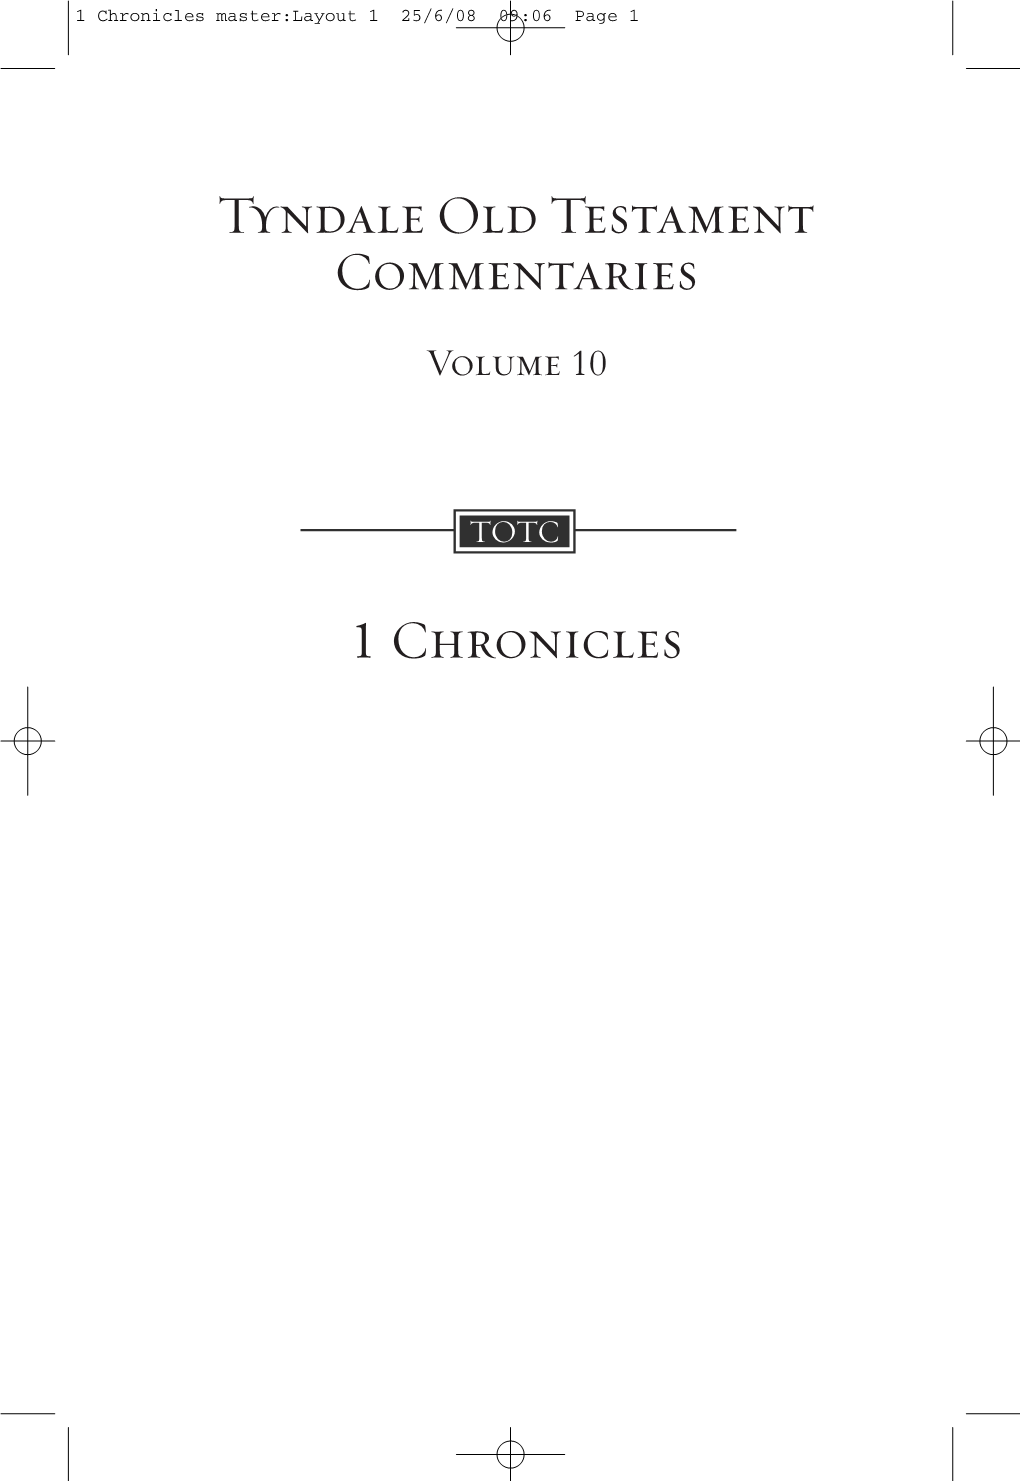 Tyndale Old Testament Commentaries 1 Chronicles